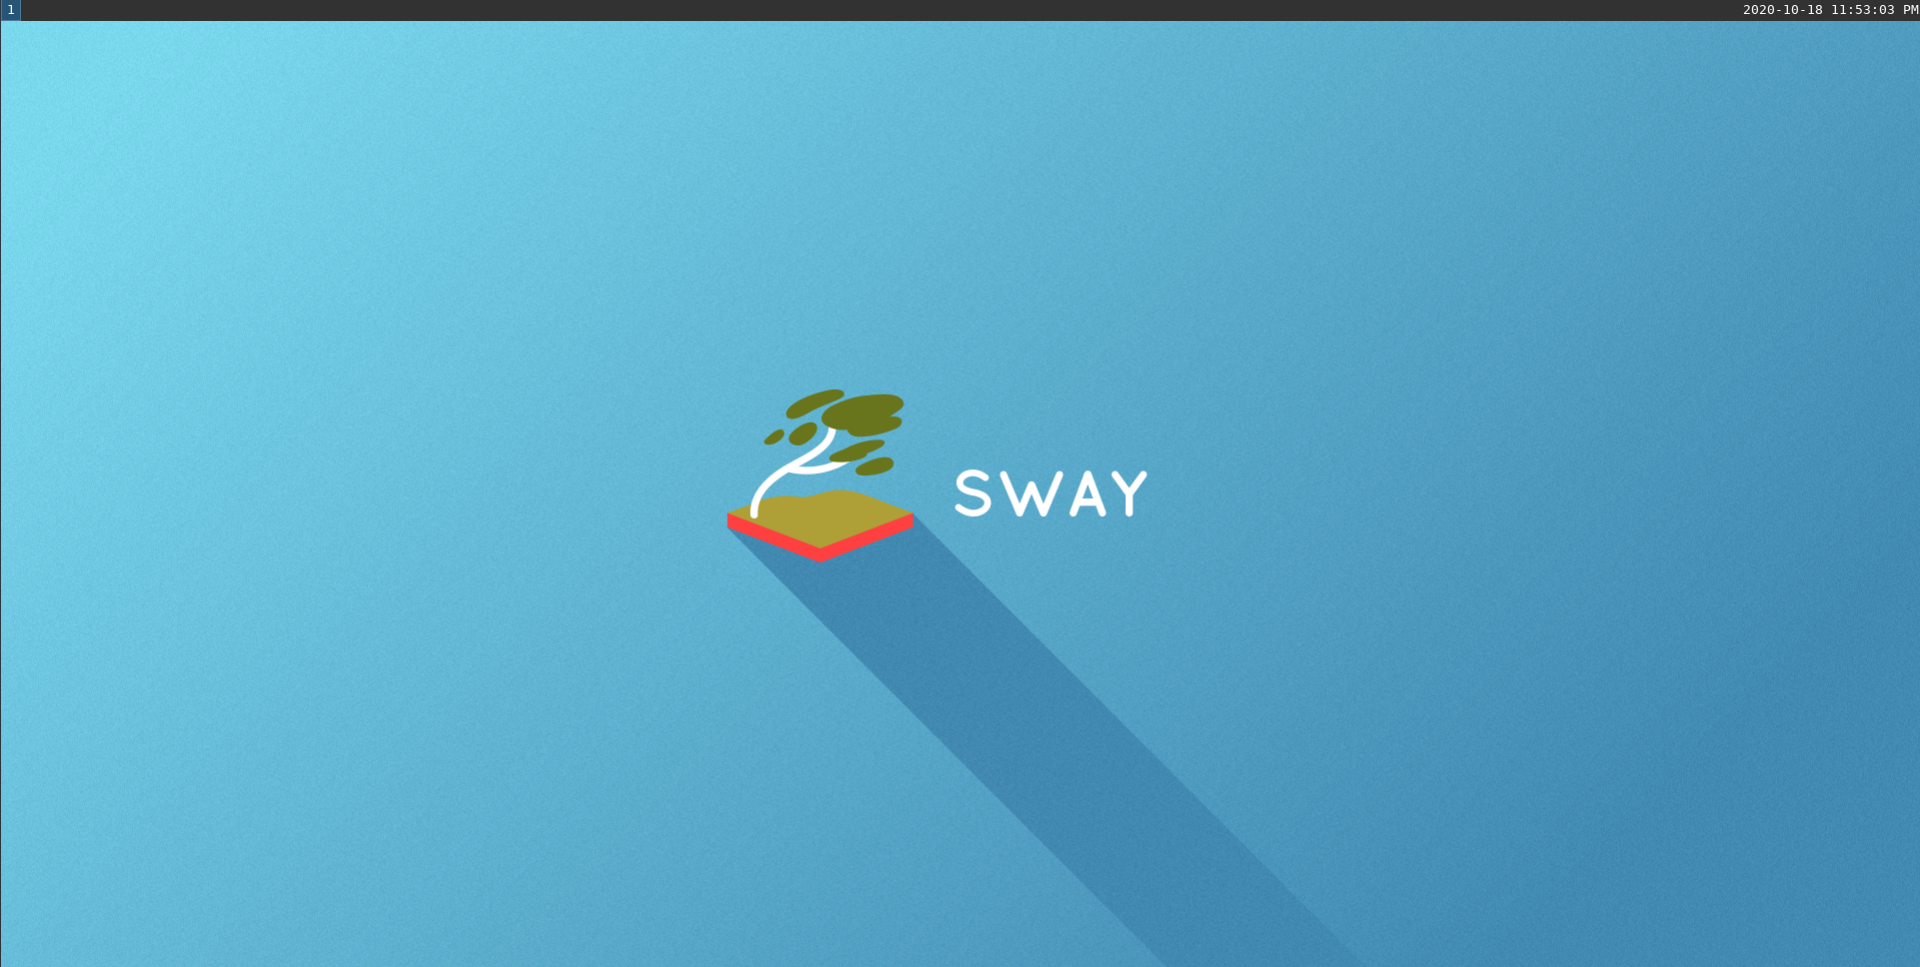 Sway welcome page